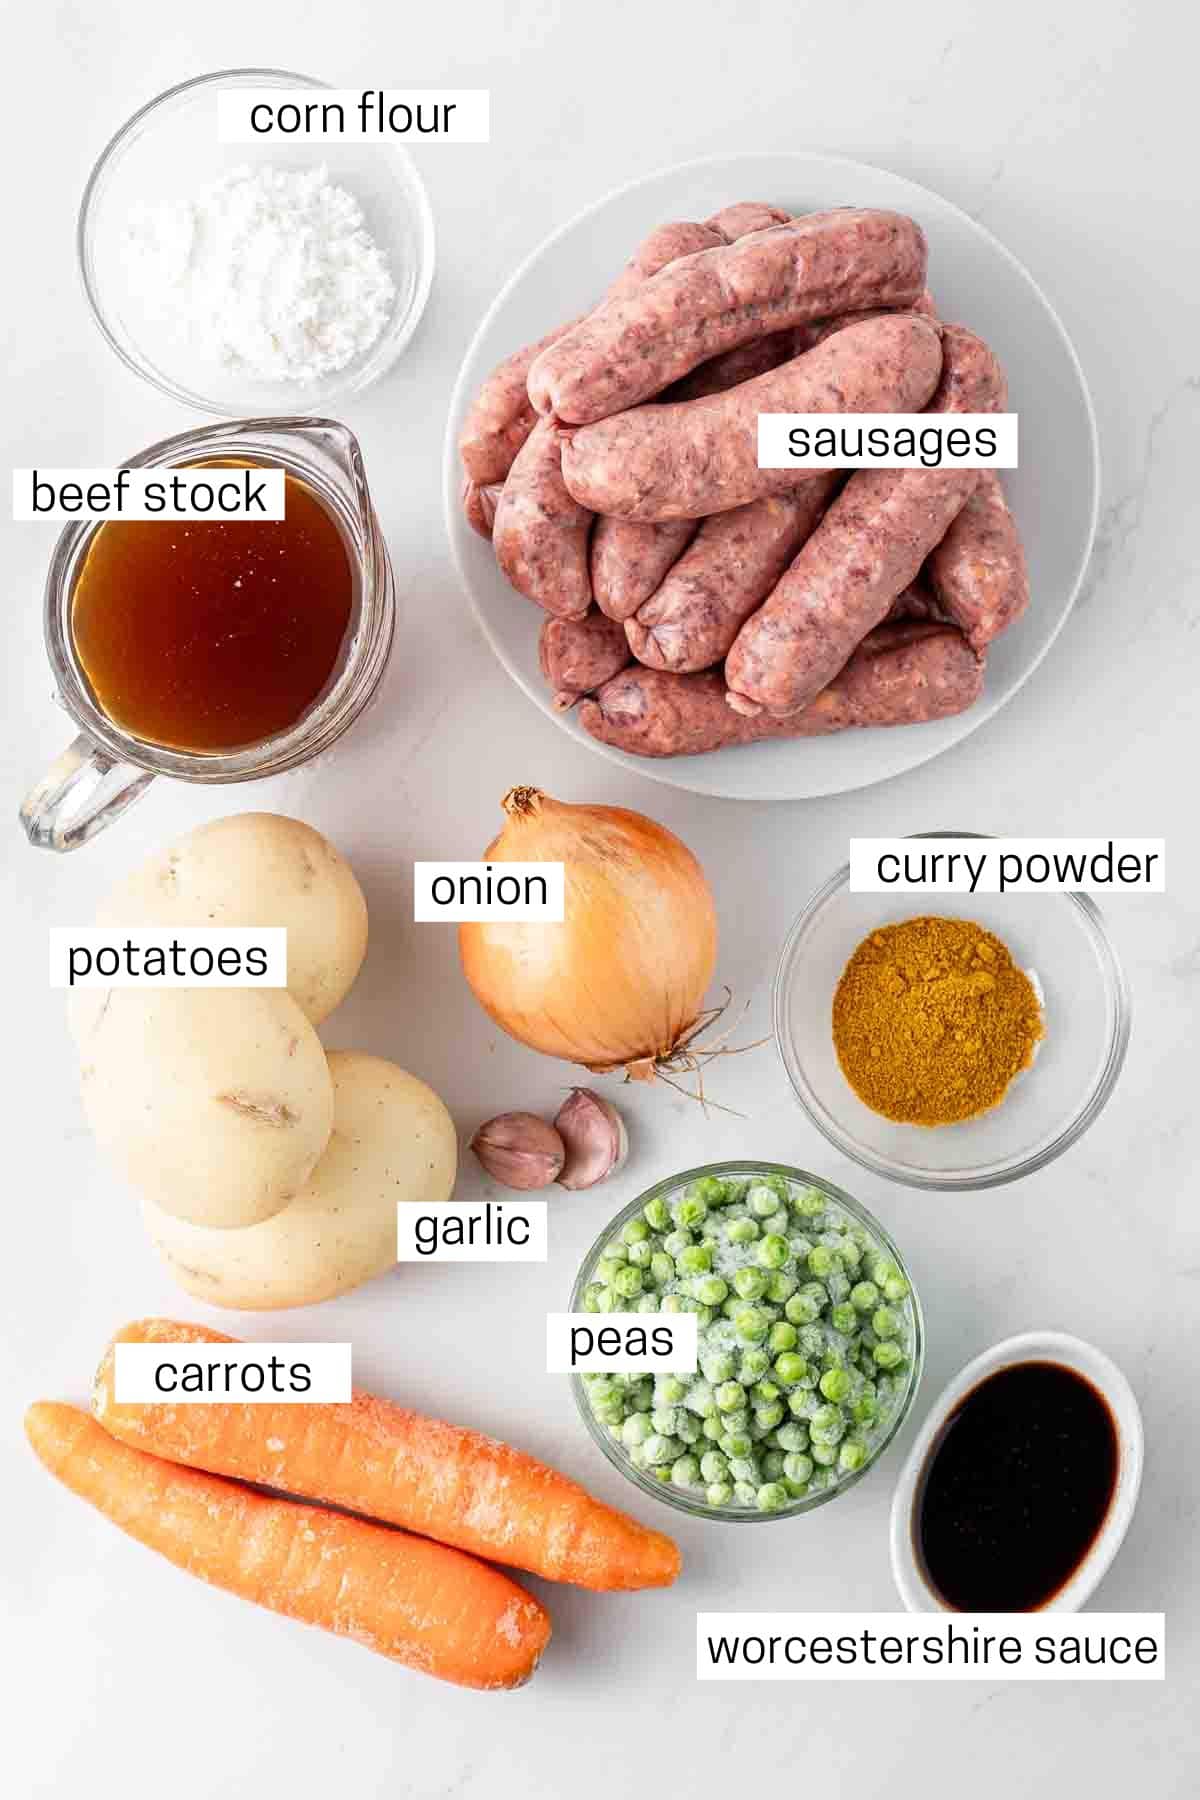 All ingredients needed for slow cooked curried sausages ready to cook.